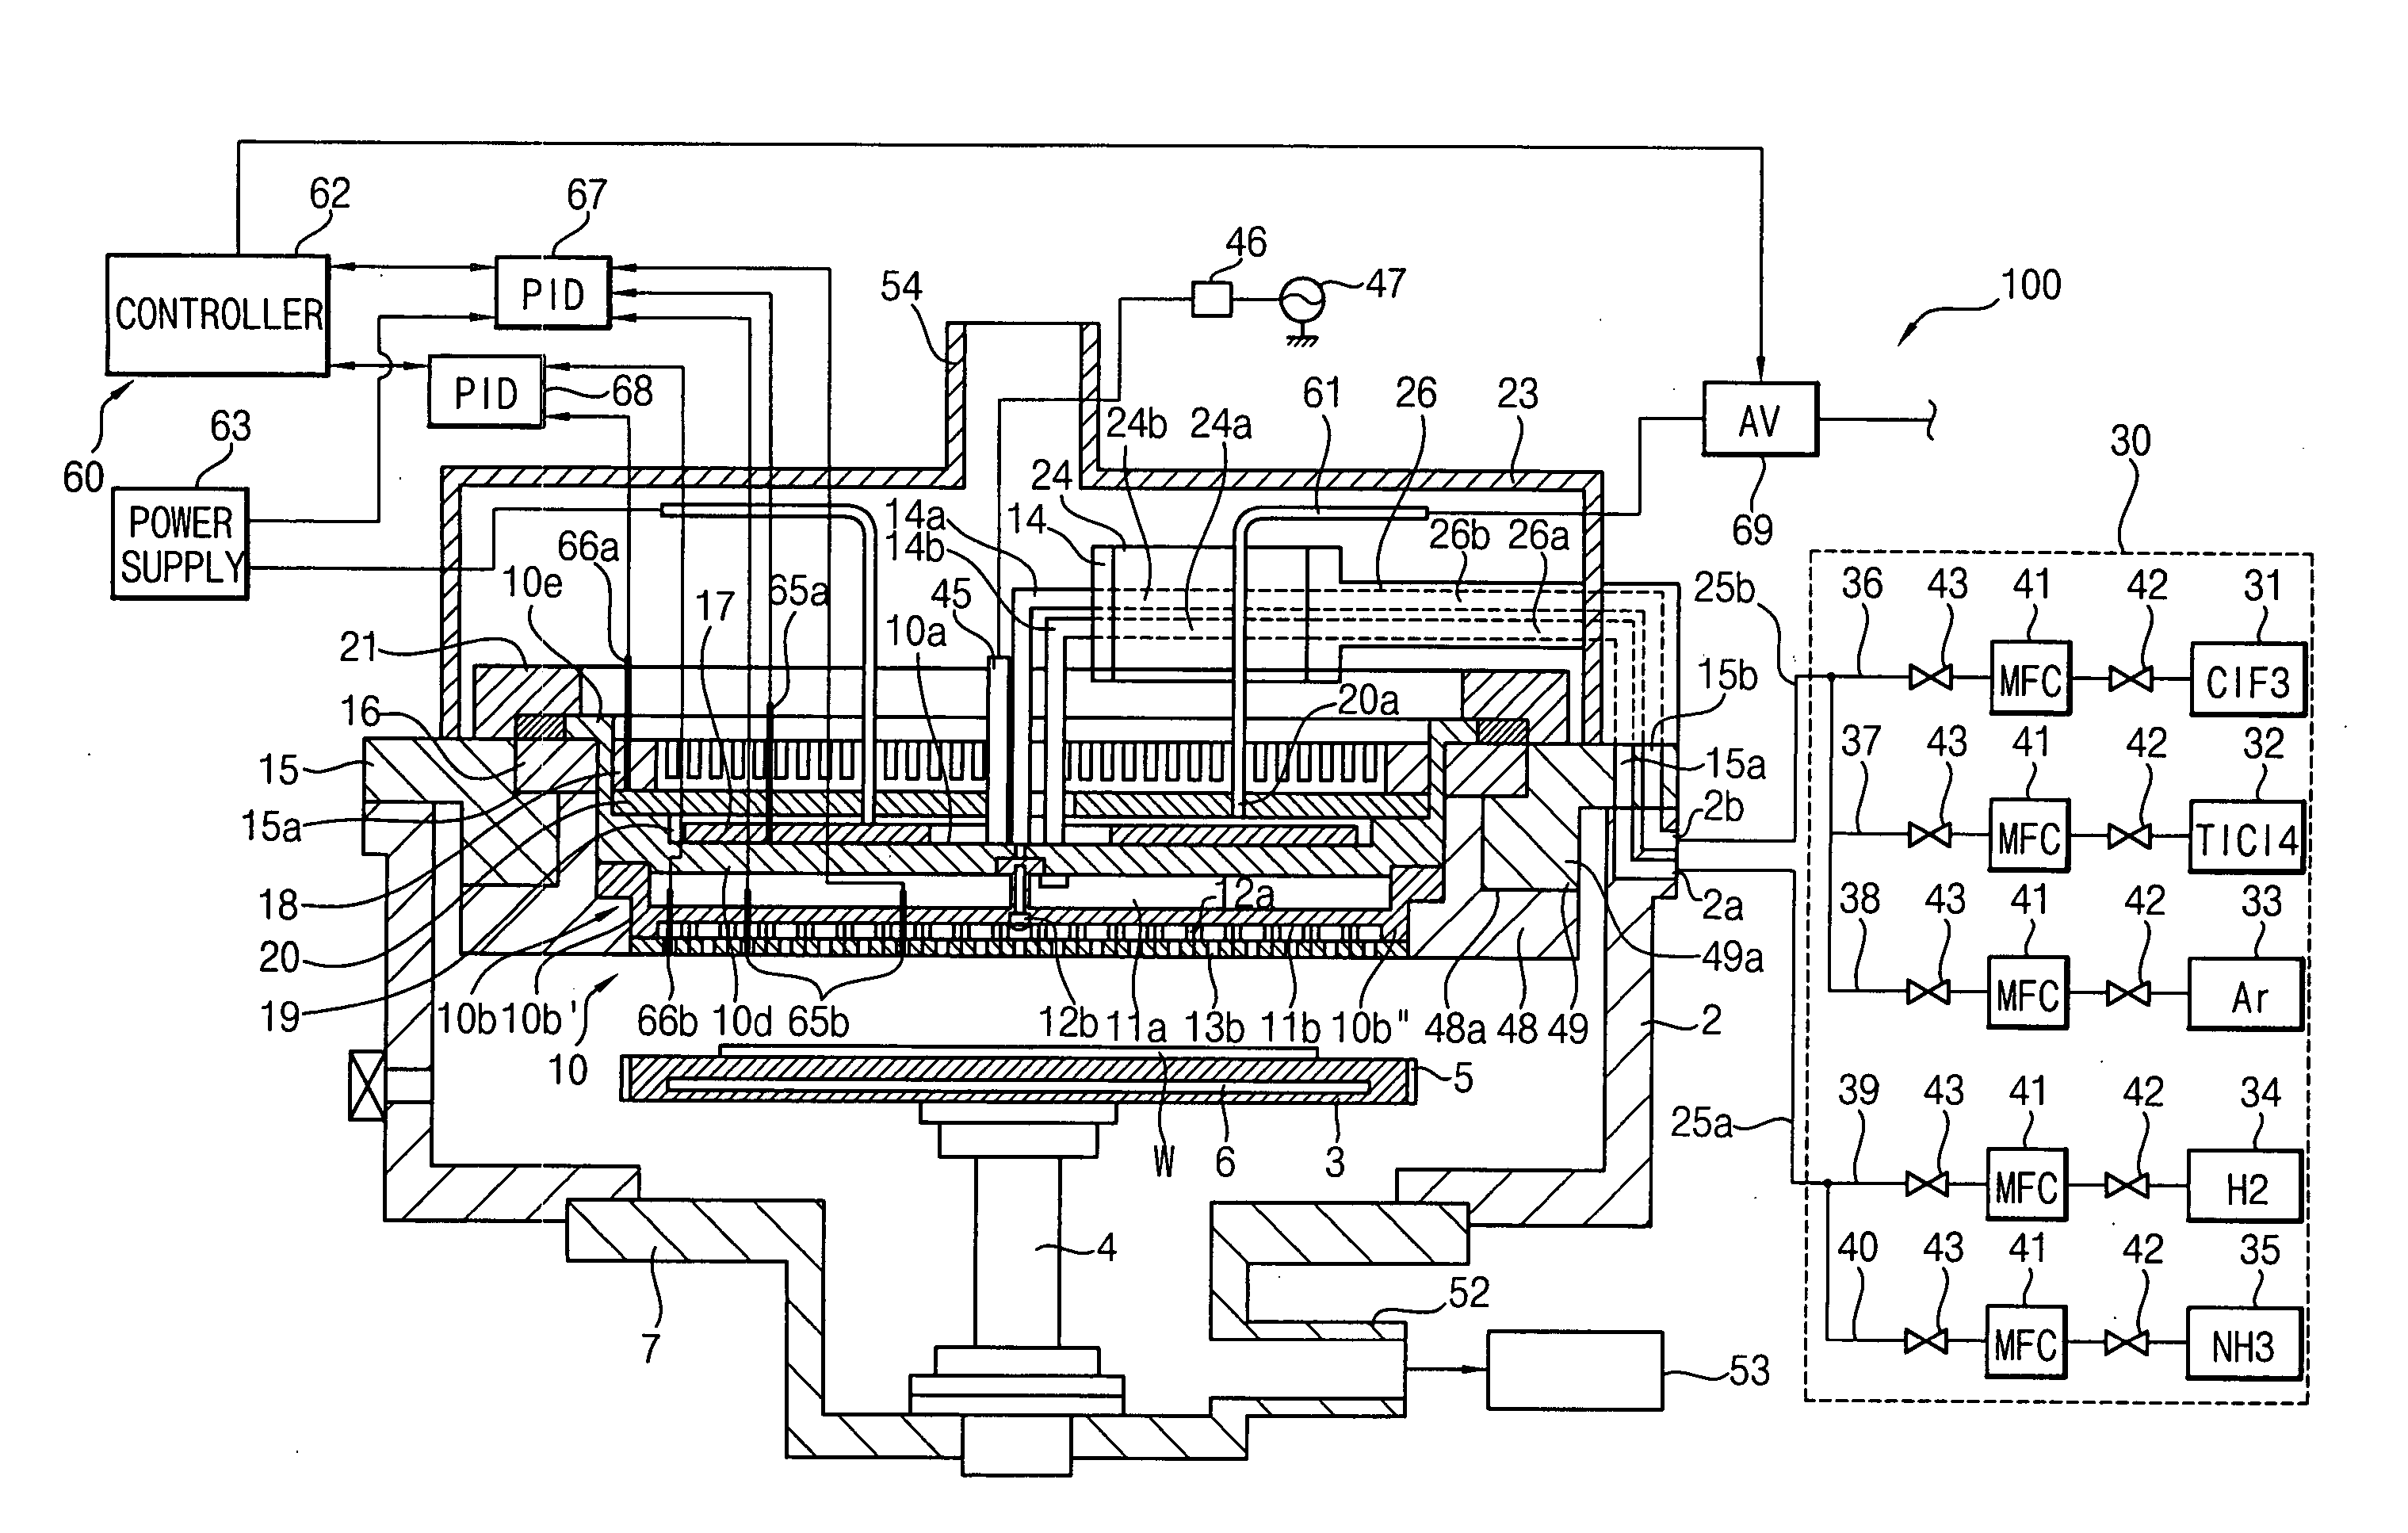 Combination of showerhead and temperature control means for controlling the temperature of the showerhead, and deposition apparatus having the same